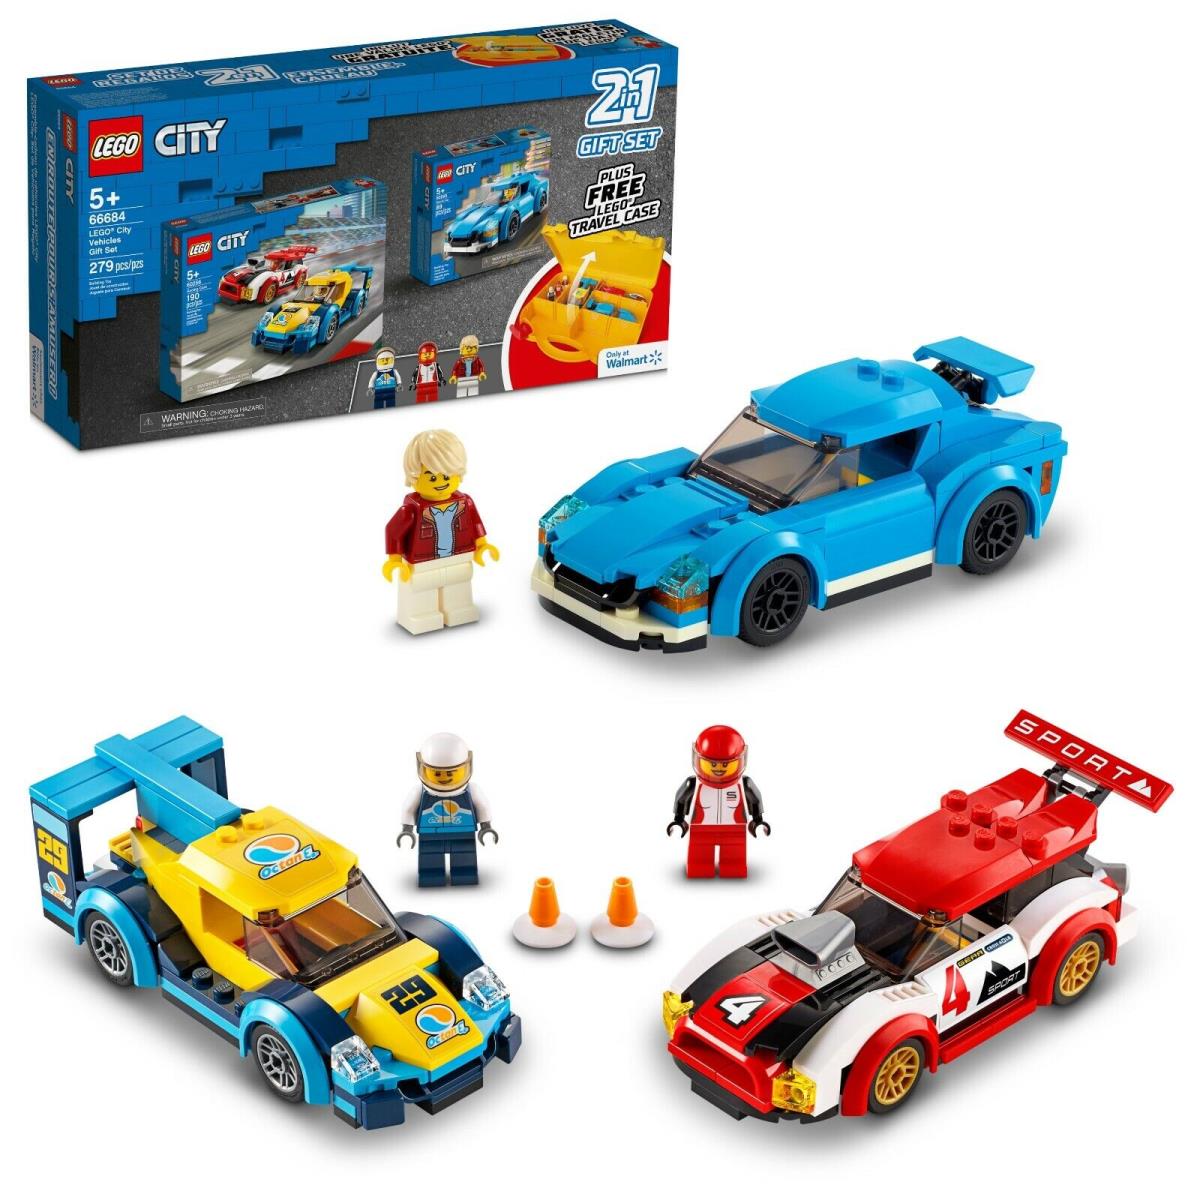 Lego City Vehicles 2 in 1 Gift Set 66684